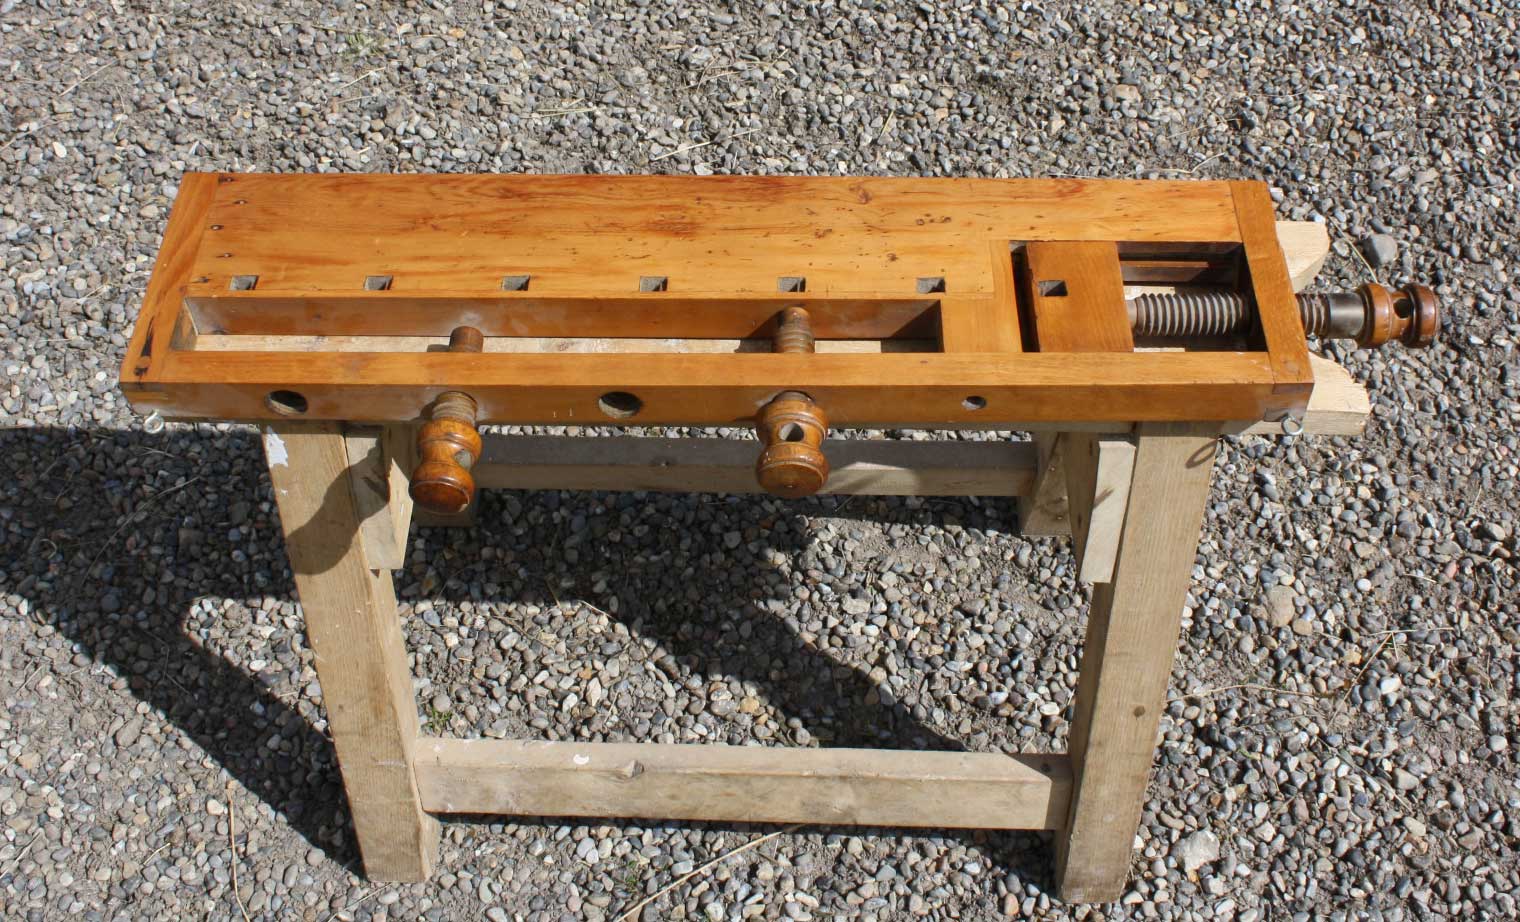 Mini woodworking bench plans